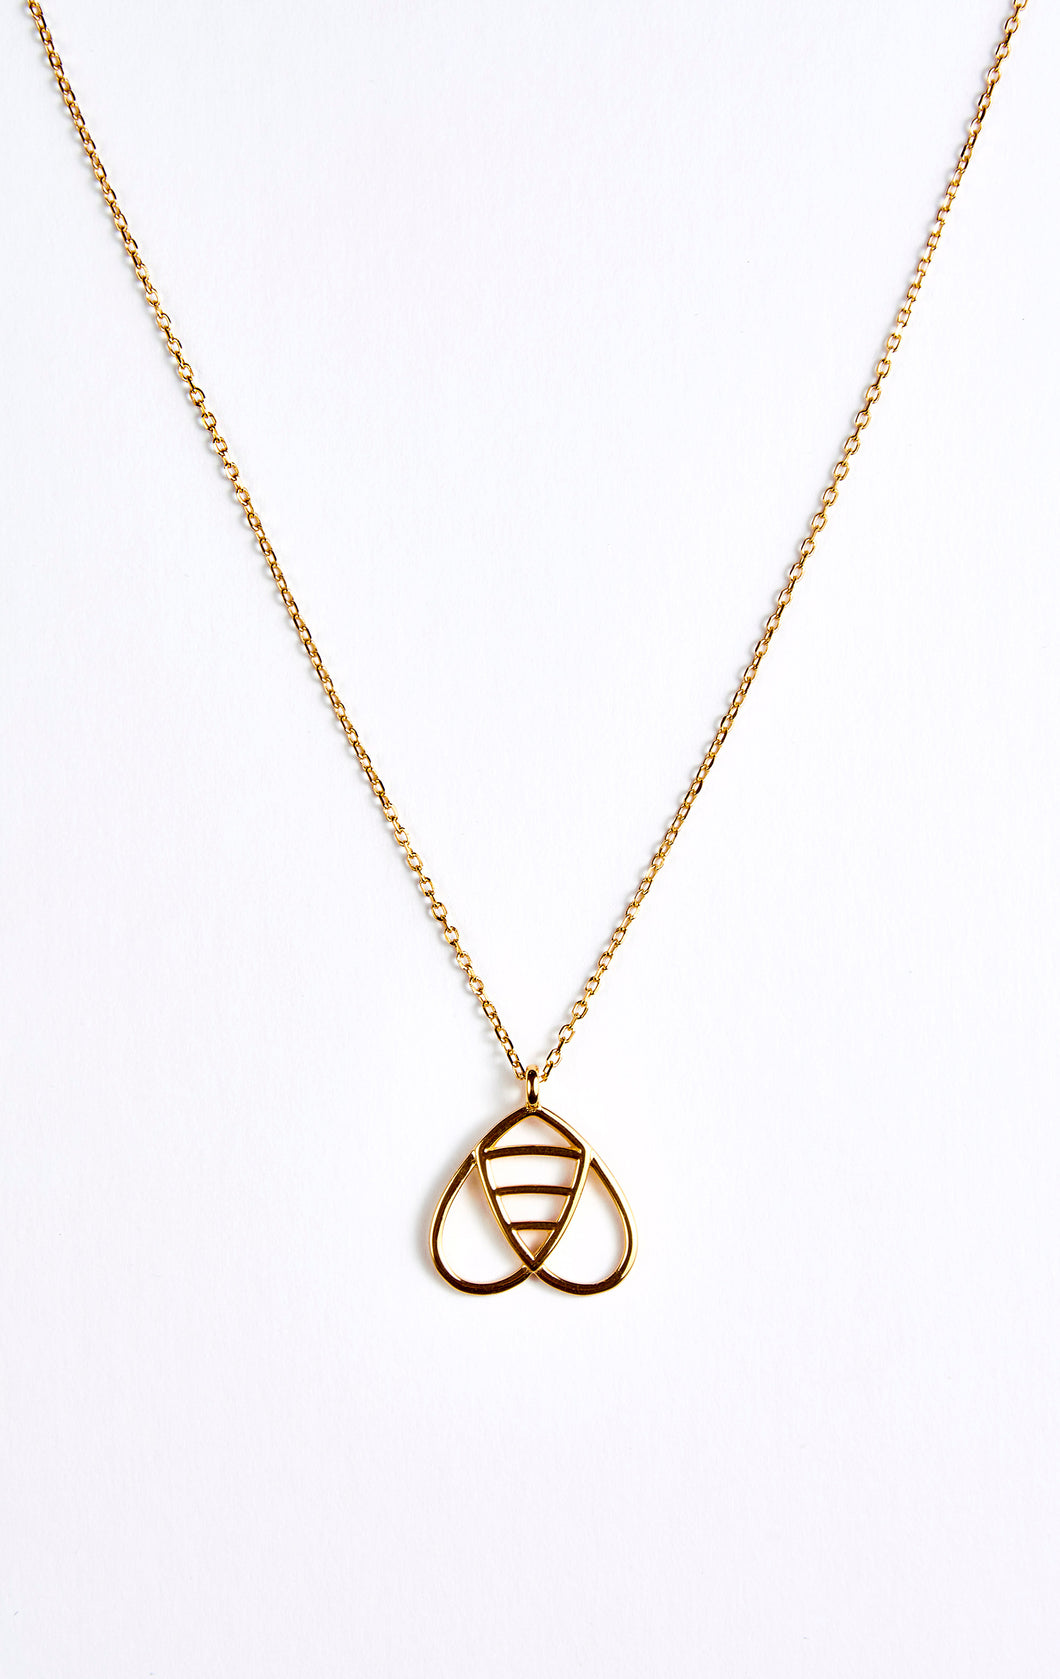 Gold Bee Inspired Pendant Necklace